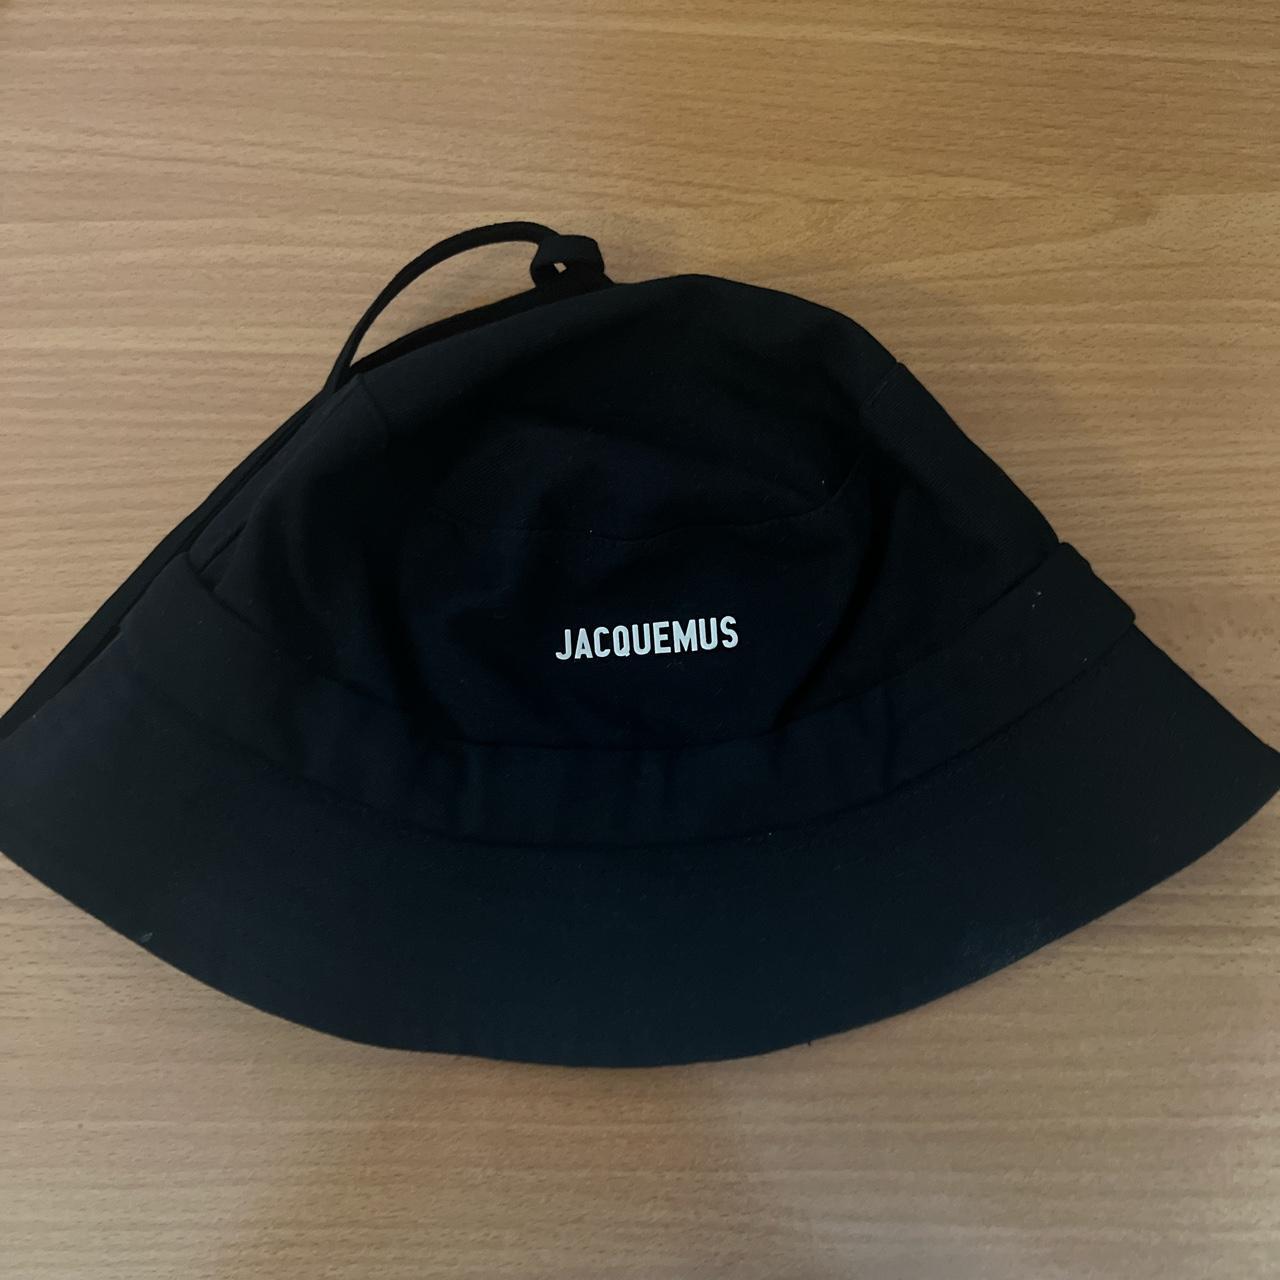 Jacquemus le Bob bucket hat in black. Bought from... - Depop